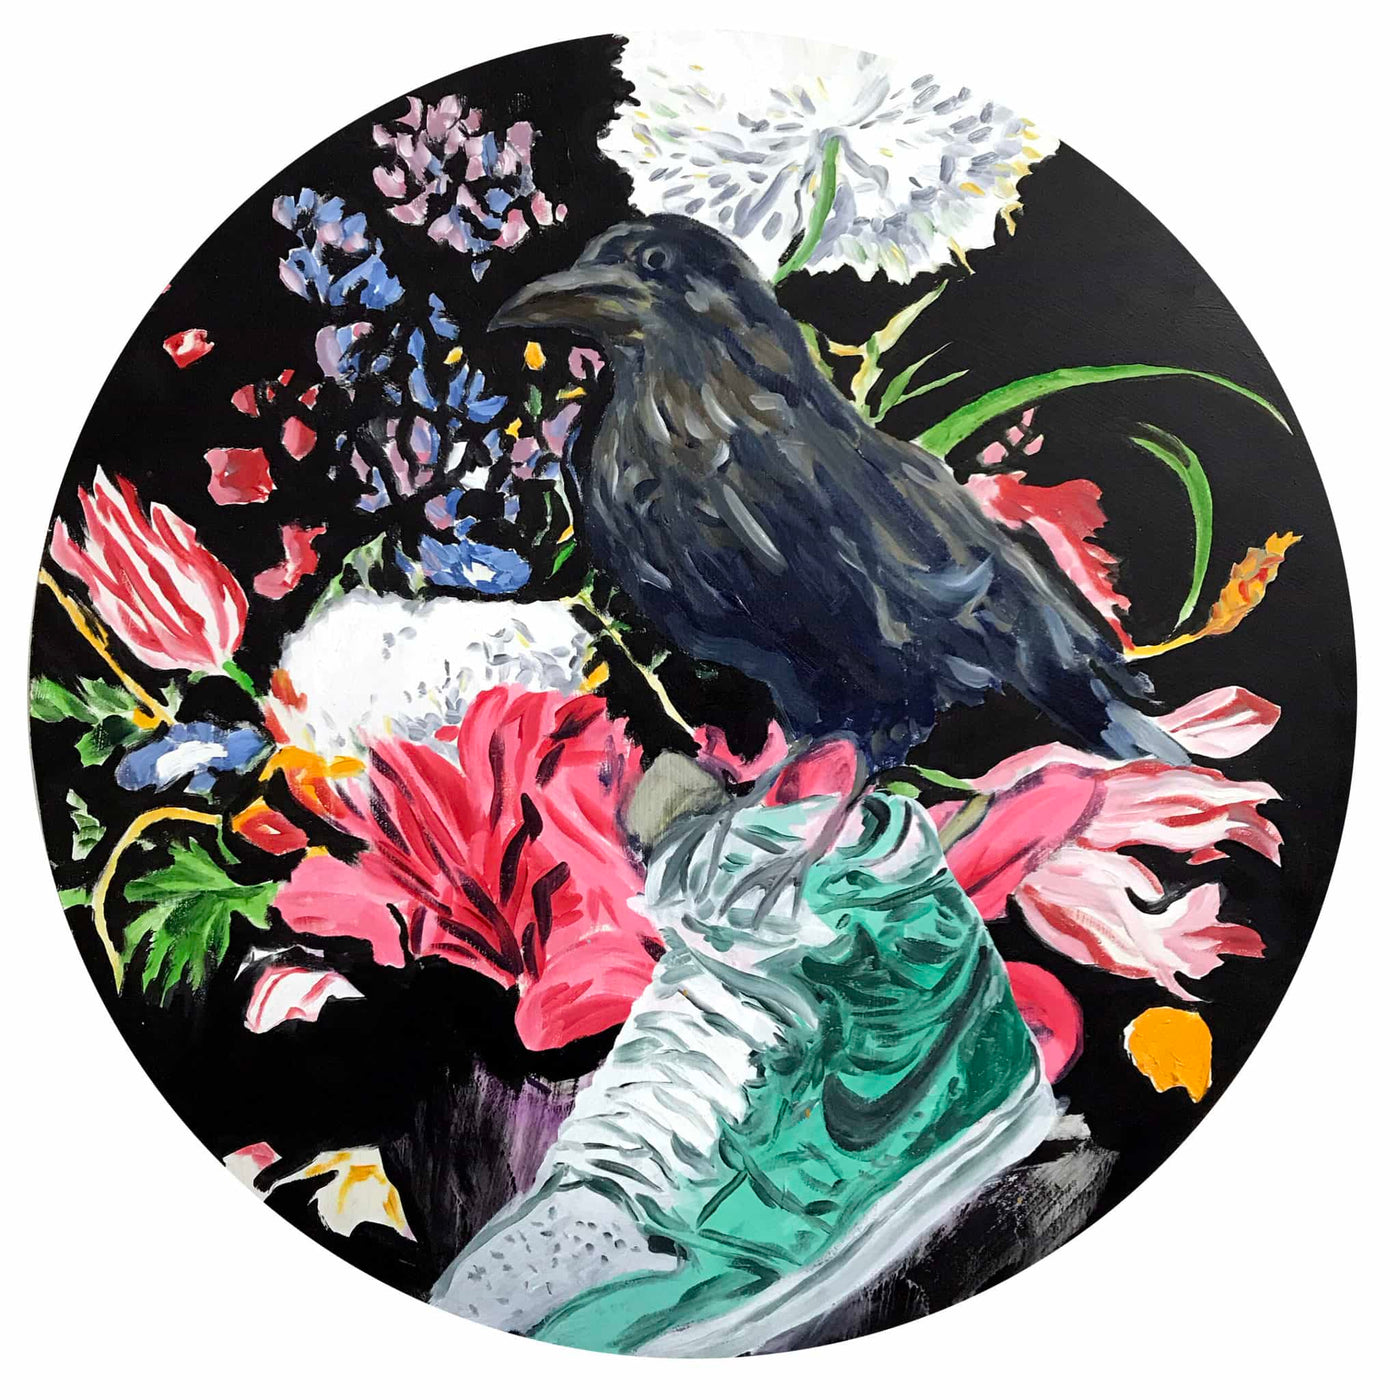 The Bird, The Flowers and The Sneaker, 2019